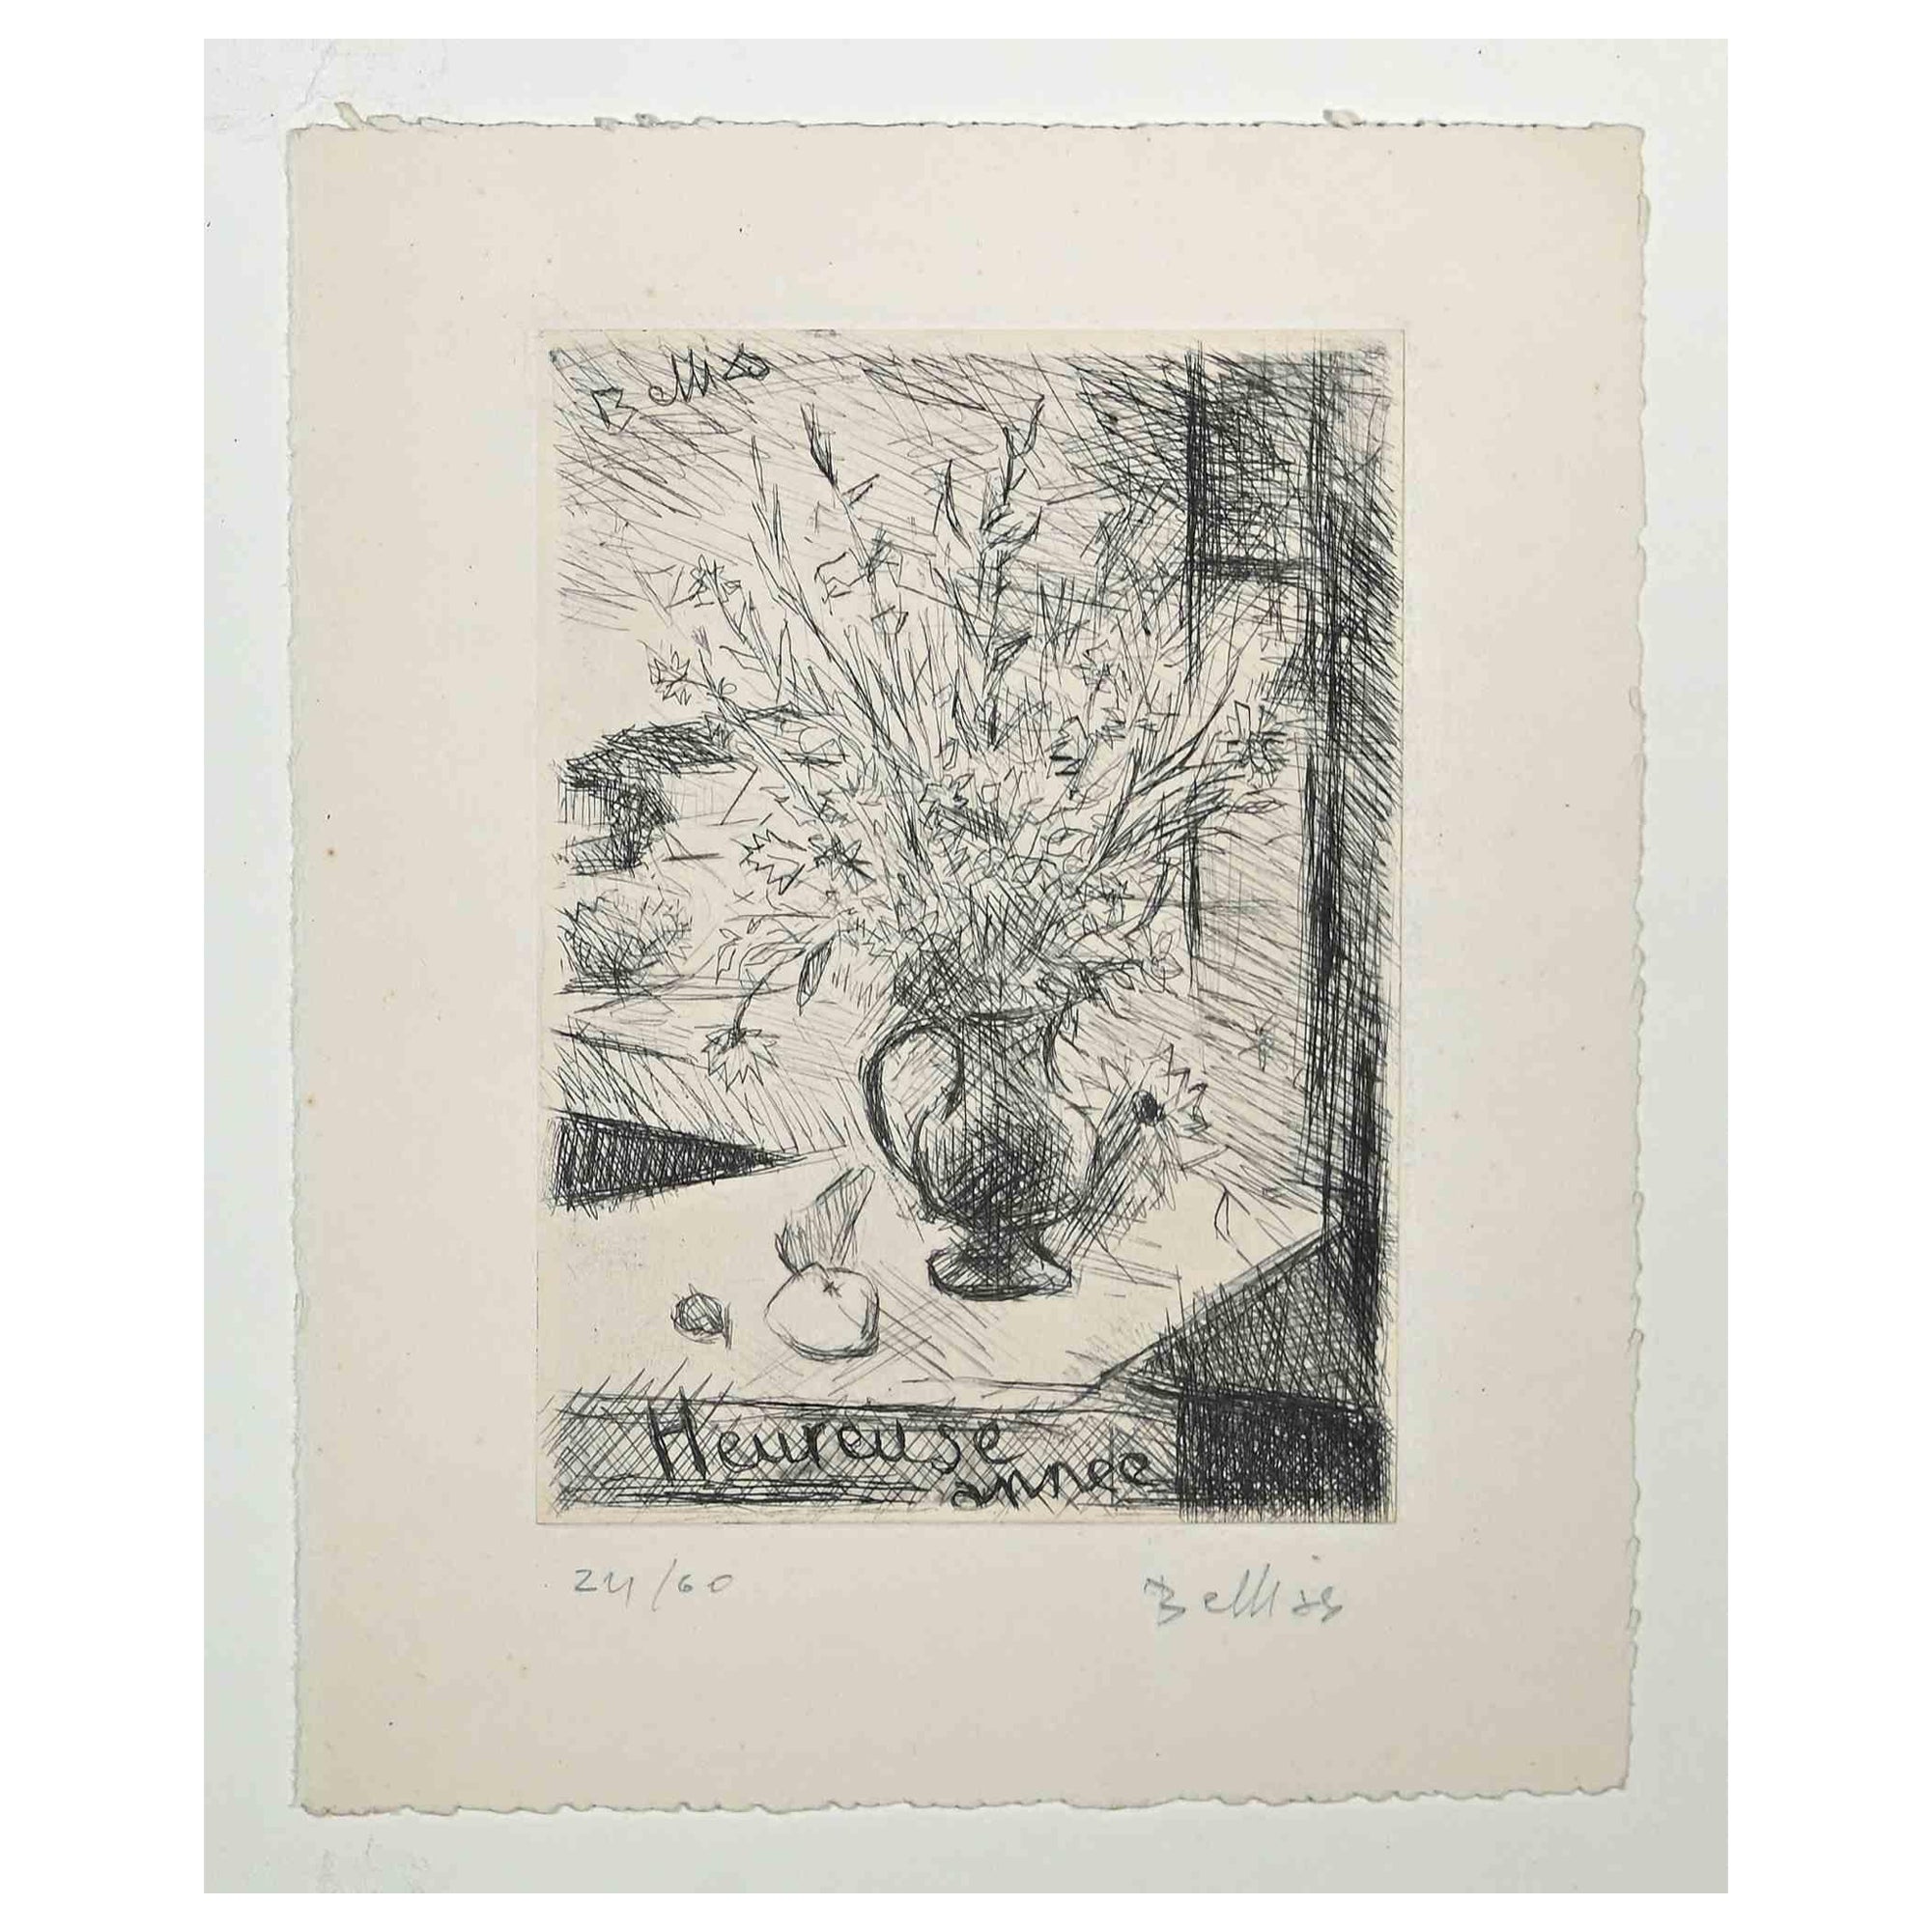 The Flower Vase is an original etching print on paper realized by Richard Bellies in 1950s.

Hand-signed and dated on the lower right.

Numbered, edition of 24/60 prints.

Included a Passepartout.

The state of preservation of the artwork is very